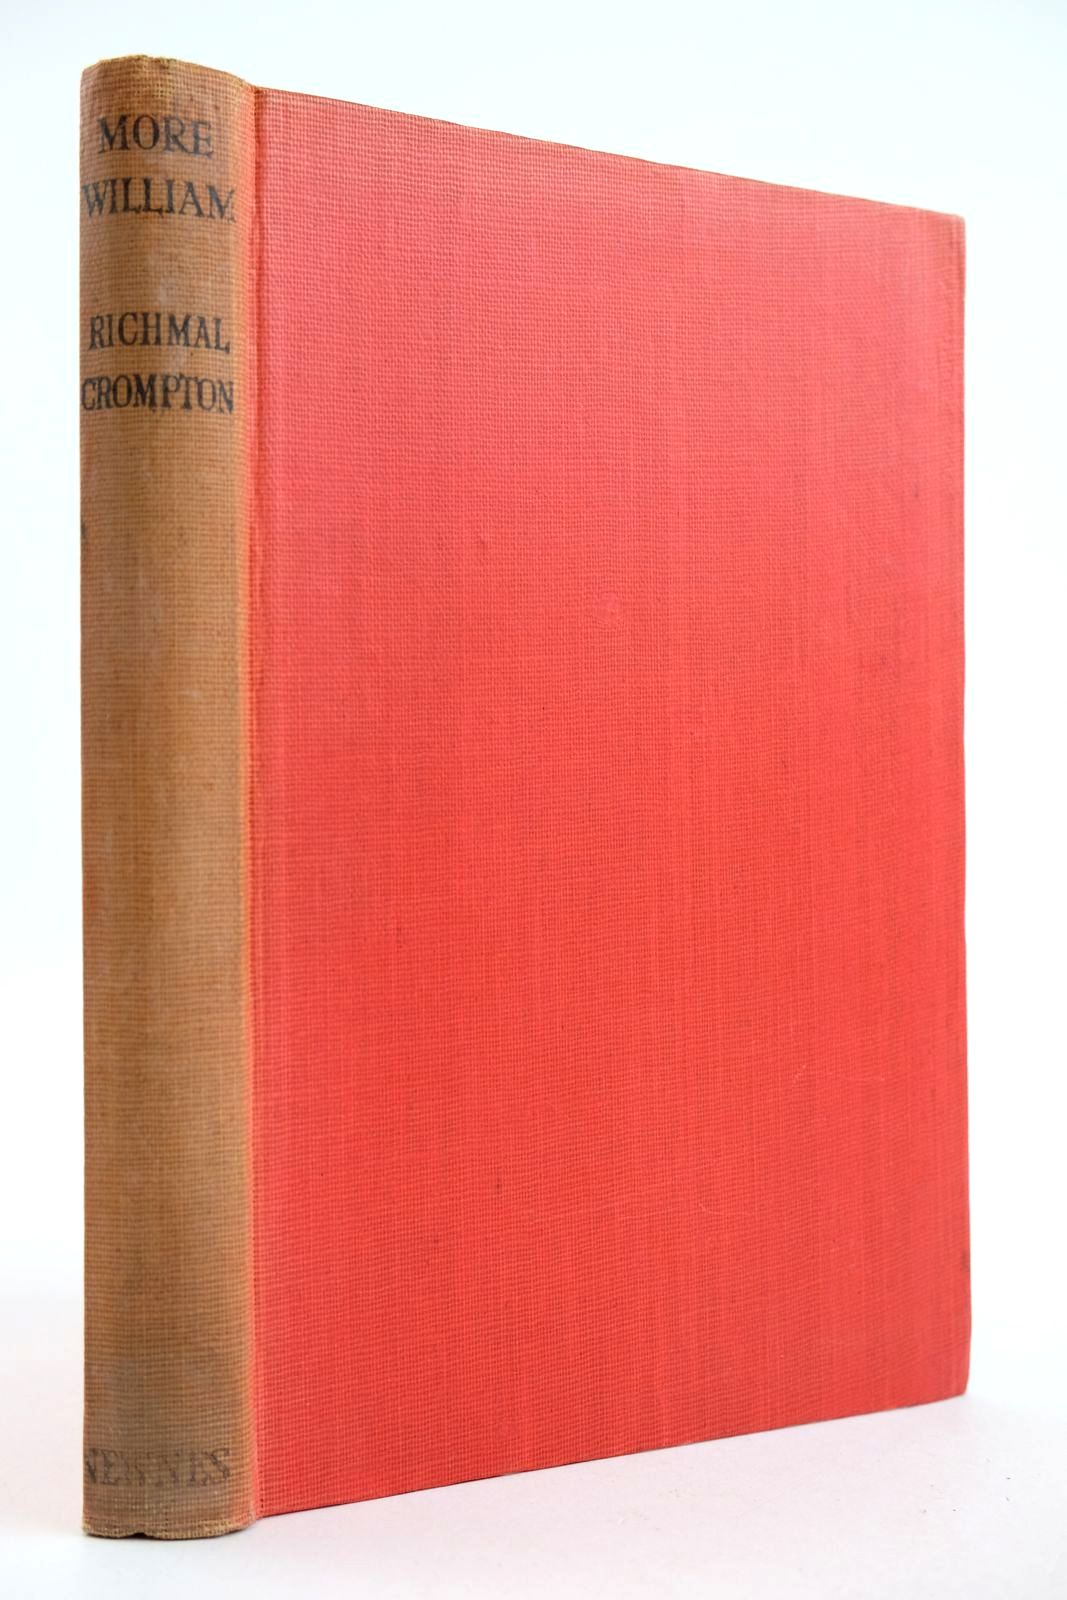 Photo of MORE WILLIAM written by Crompton, Richmal illustrated by Henry, Thomas published by George Newnes Limited (STOCK CODE: 2132746)  for sale by Stella & Rose's Books